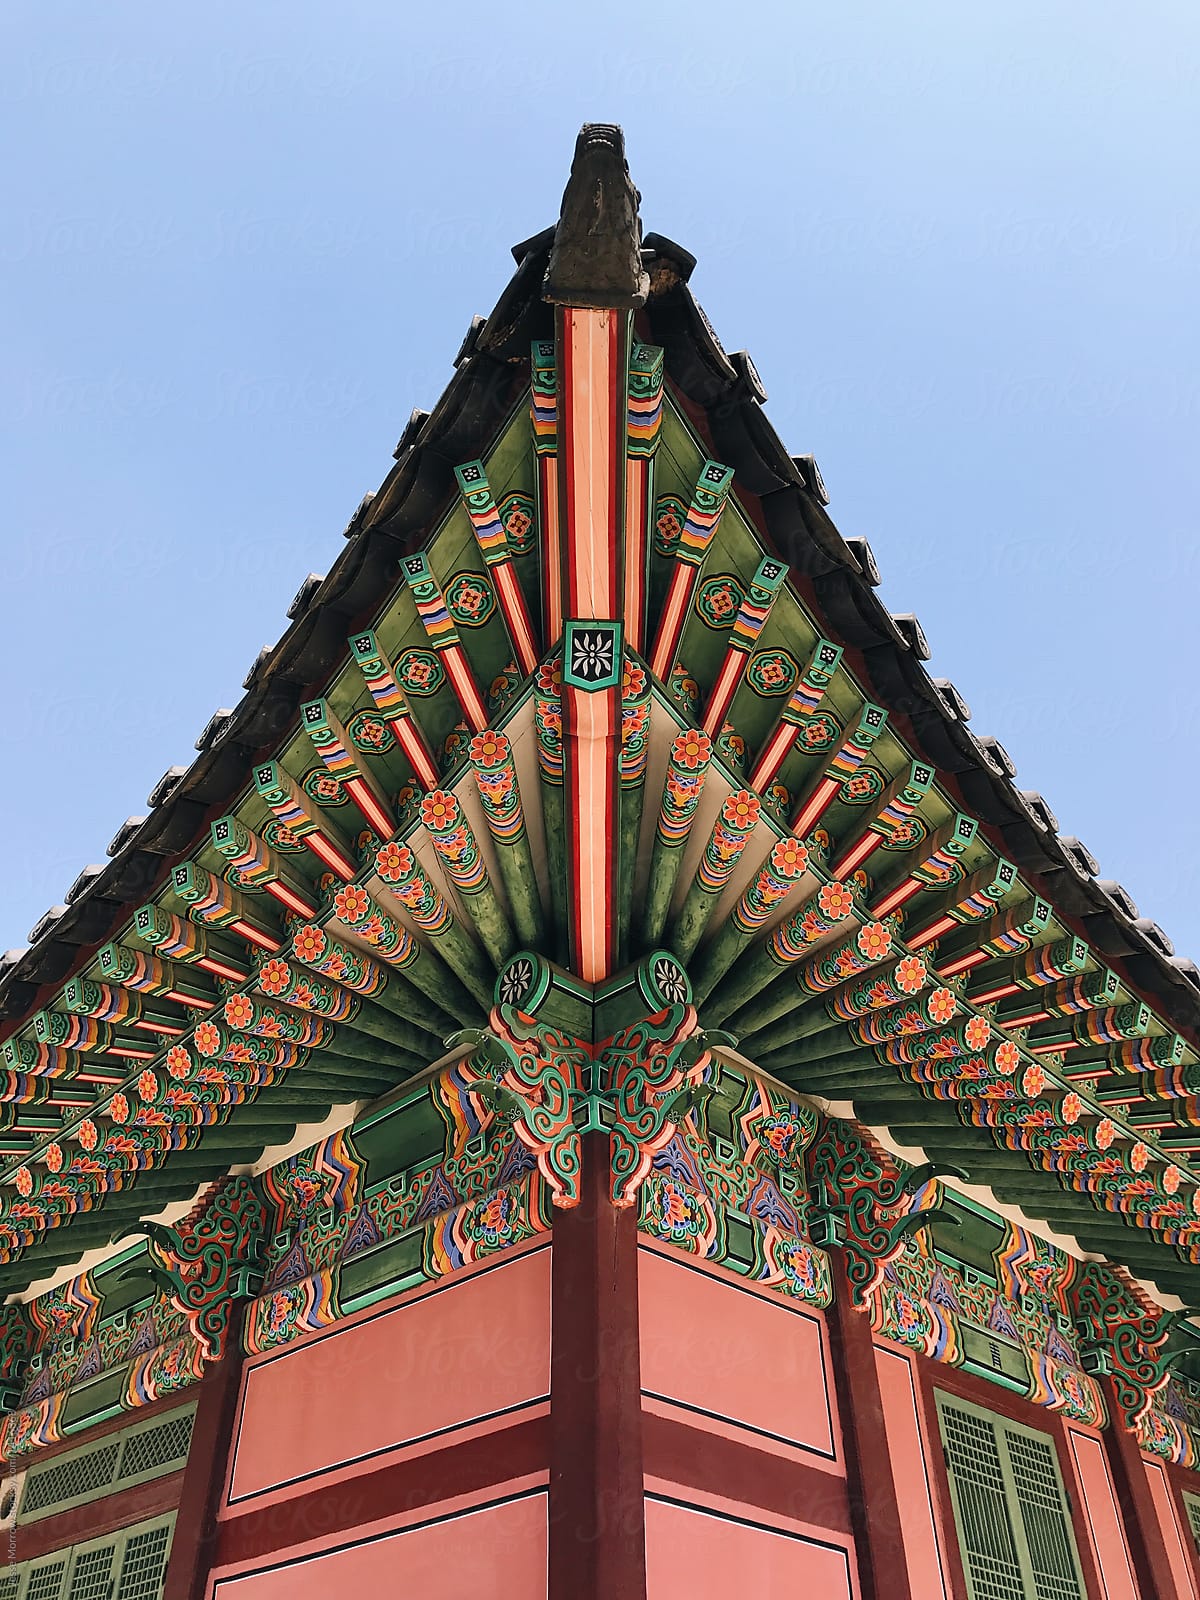 ornate detail and painting on south korean palace building